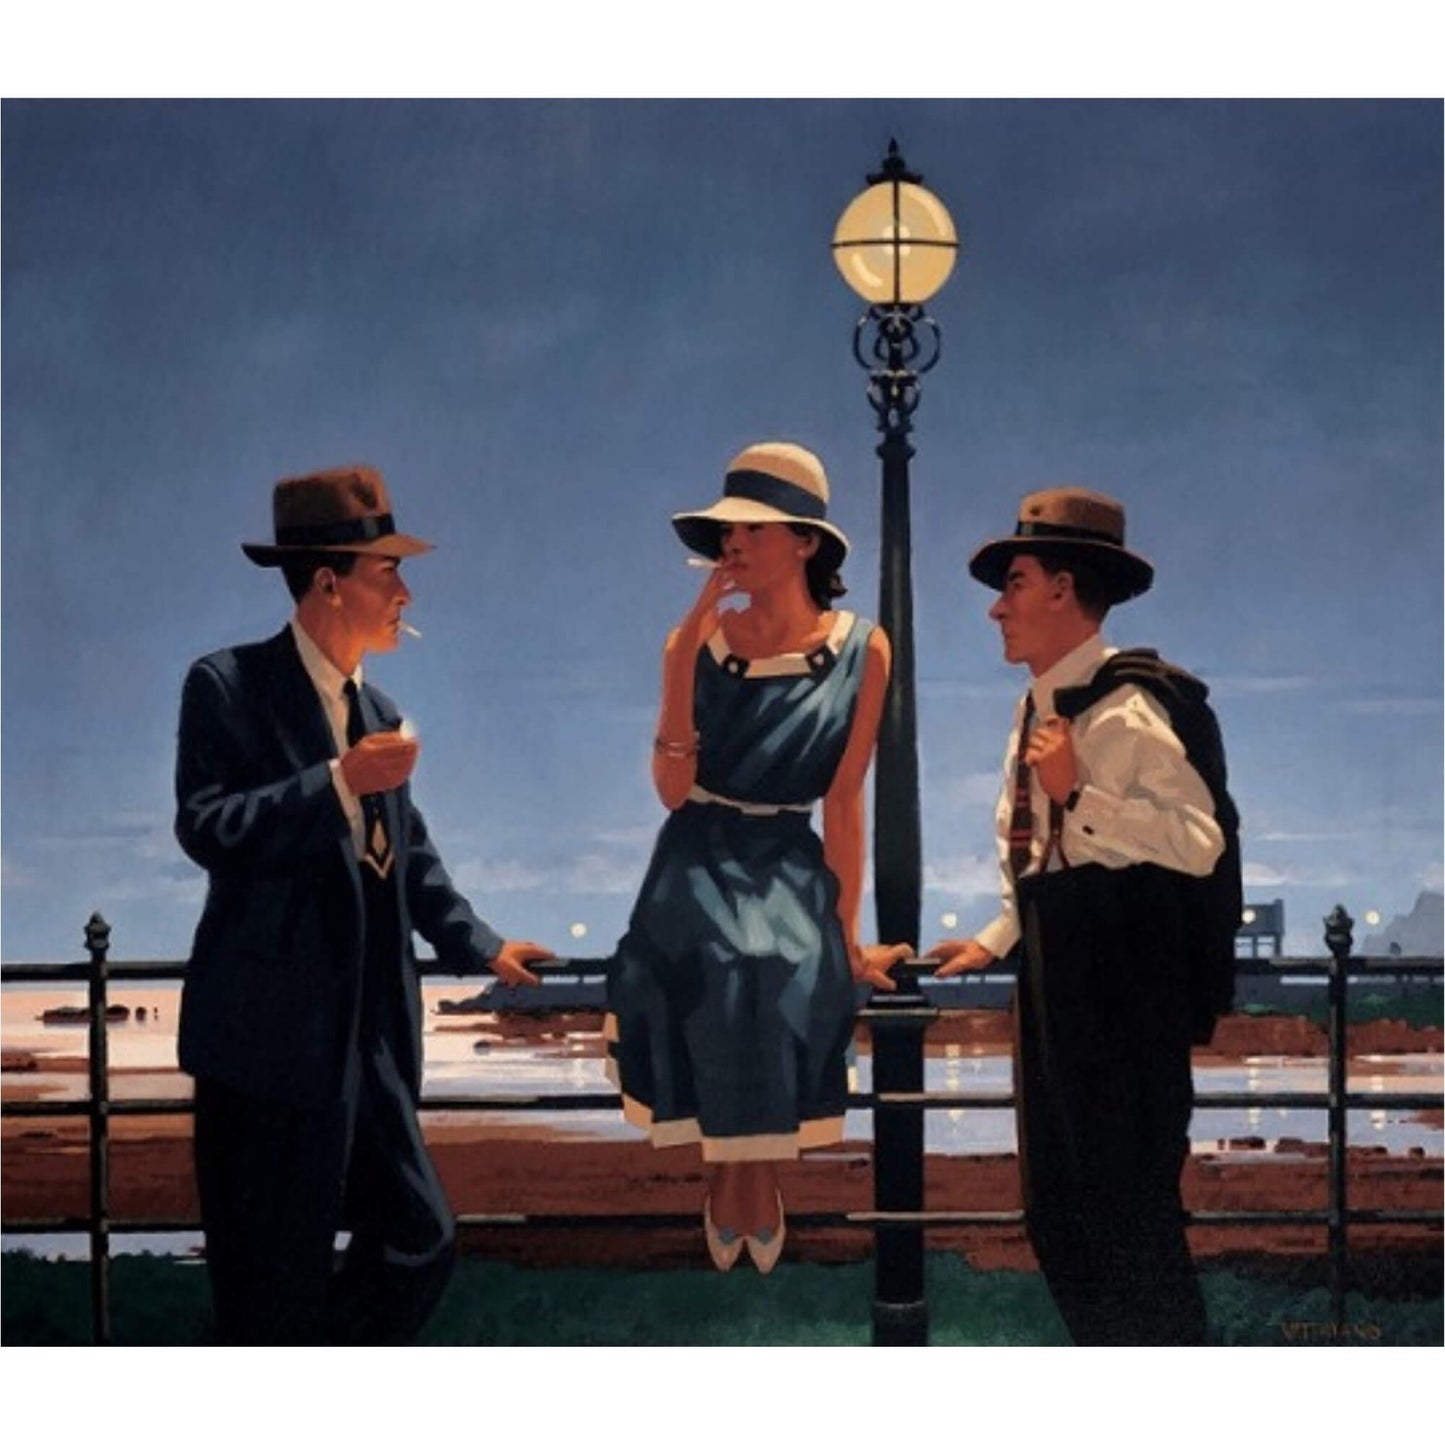 Load image into Gallery viewer, Game of Life Limited Edition Print Jack Vettriano
